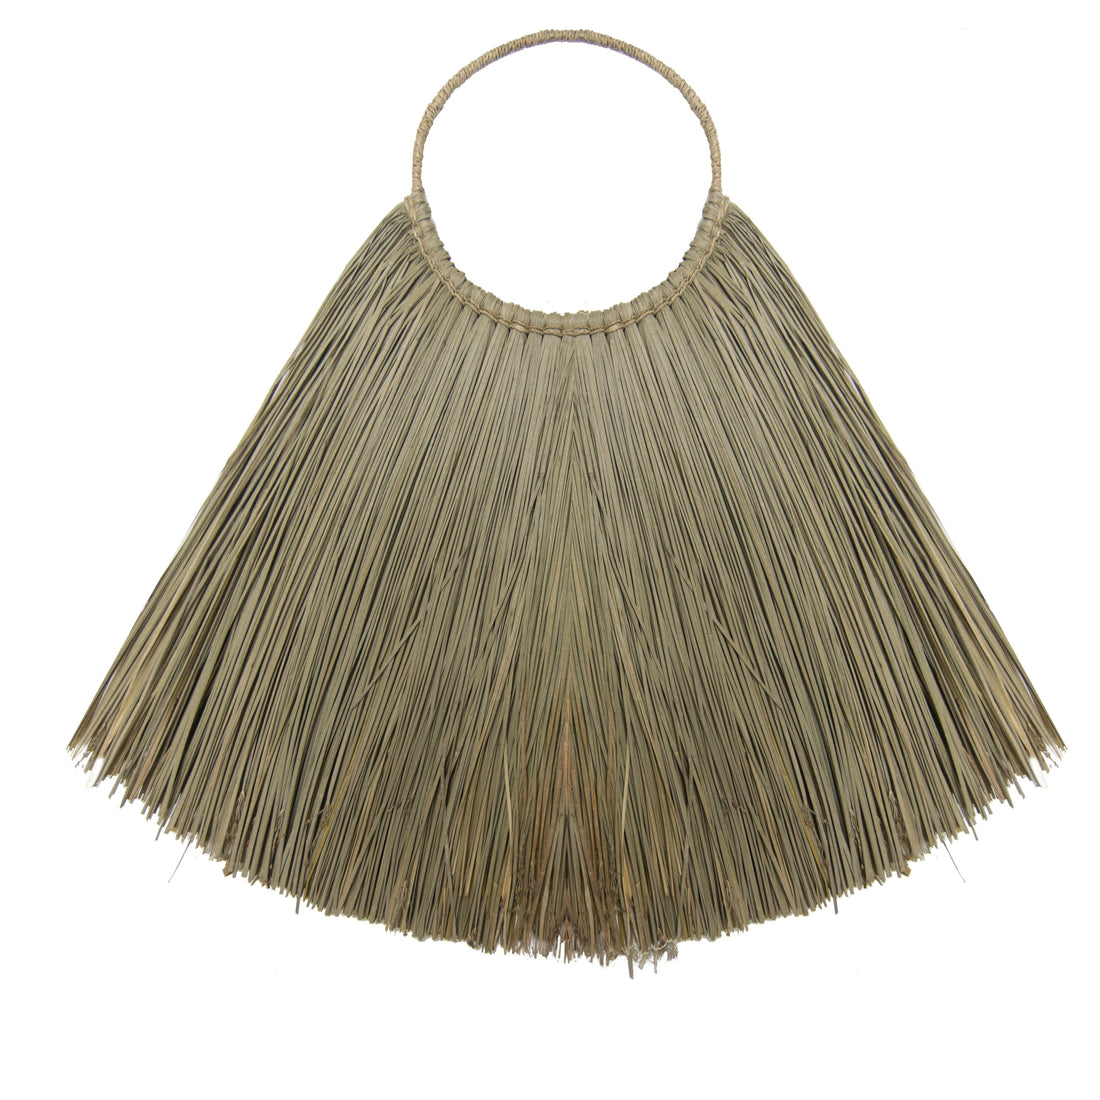 Large Seagrass Fan Wall Decor - Natural - best price from Maltashopper.com NWA-06